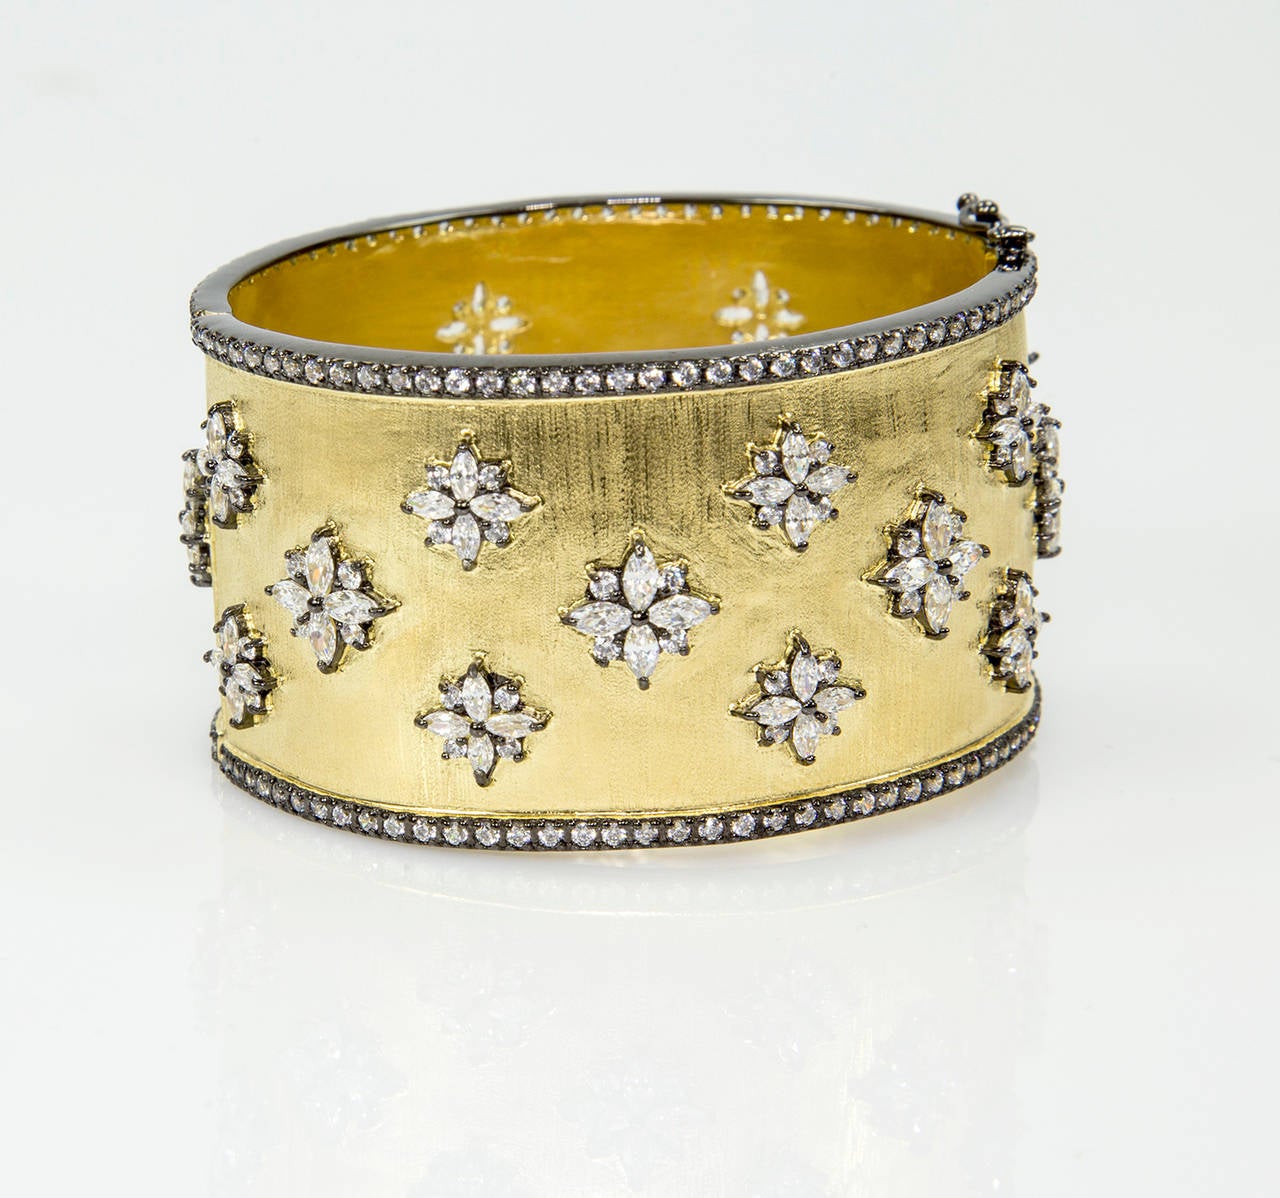 Gorgeous Textured Gilt Silver Cuff Bangle Bracelet studded with CZ in black rhodium snowflake designs and black rhodium CZ encrusted outer borders. Push clasp and double ‘8’ safety. Marked: 925. Fits average wrist size. Interior measurements: 2.25”